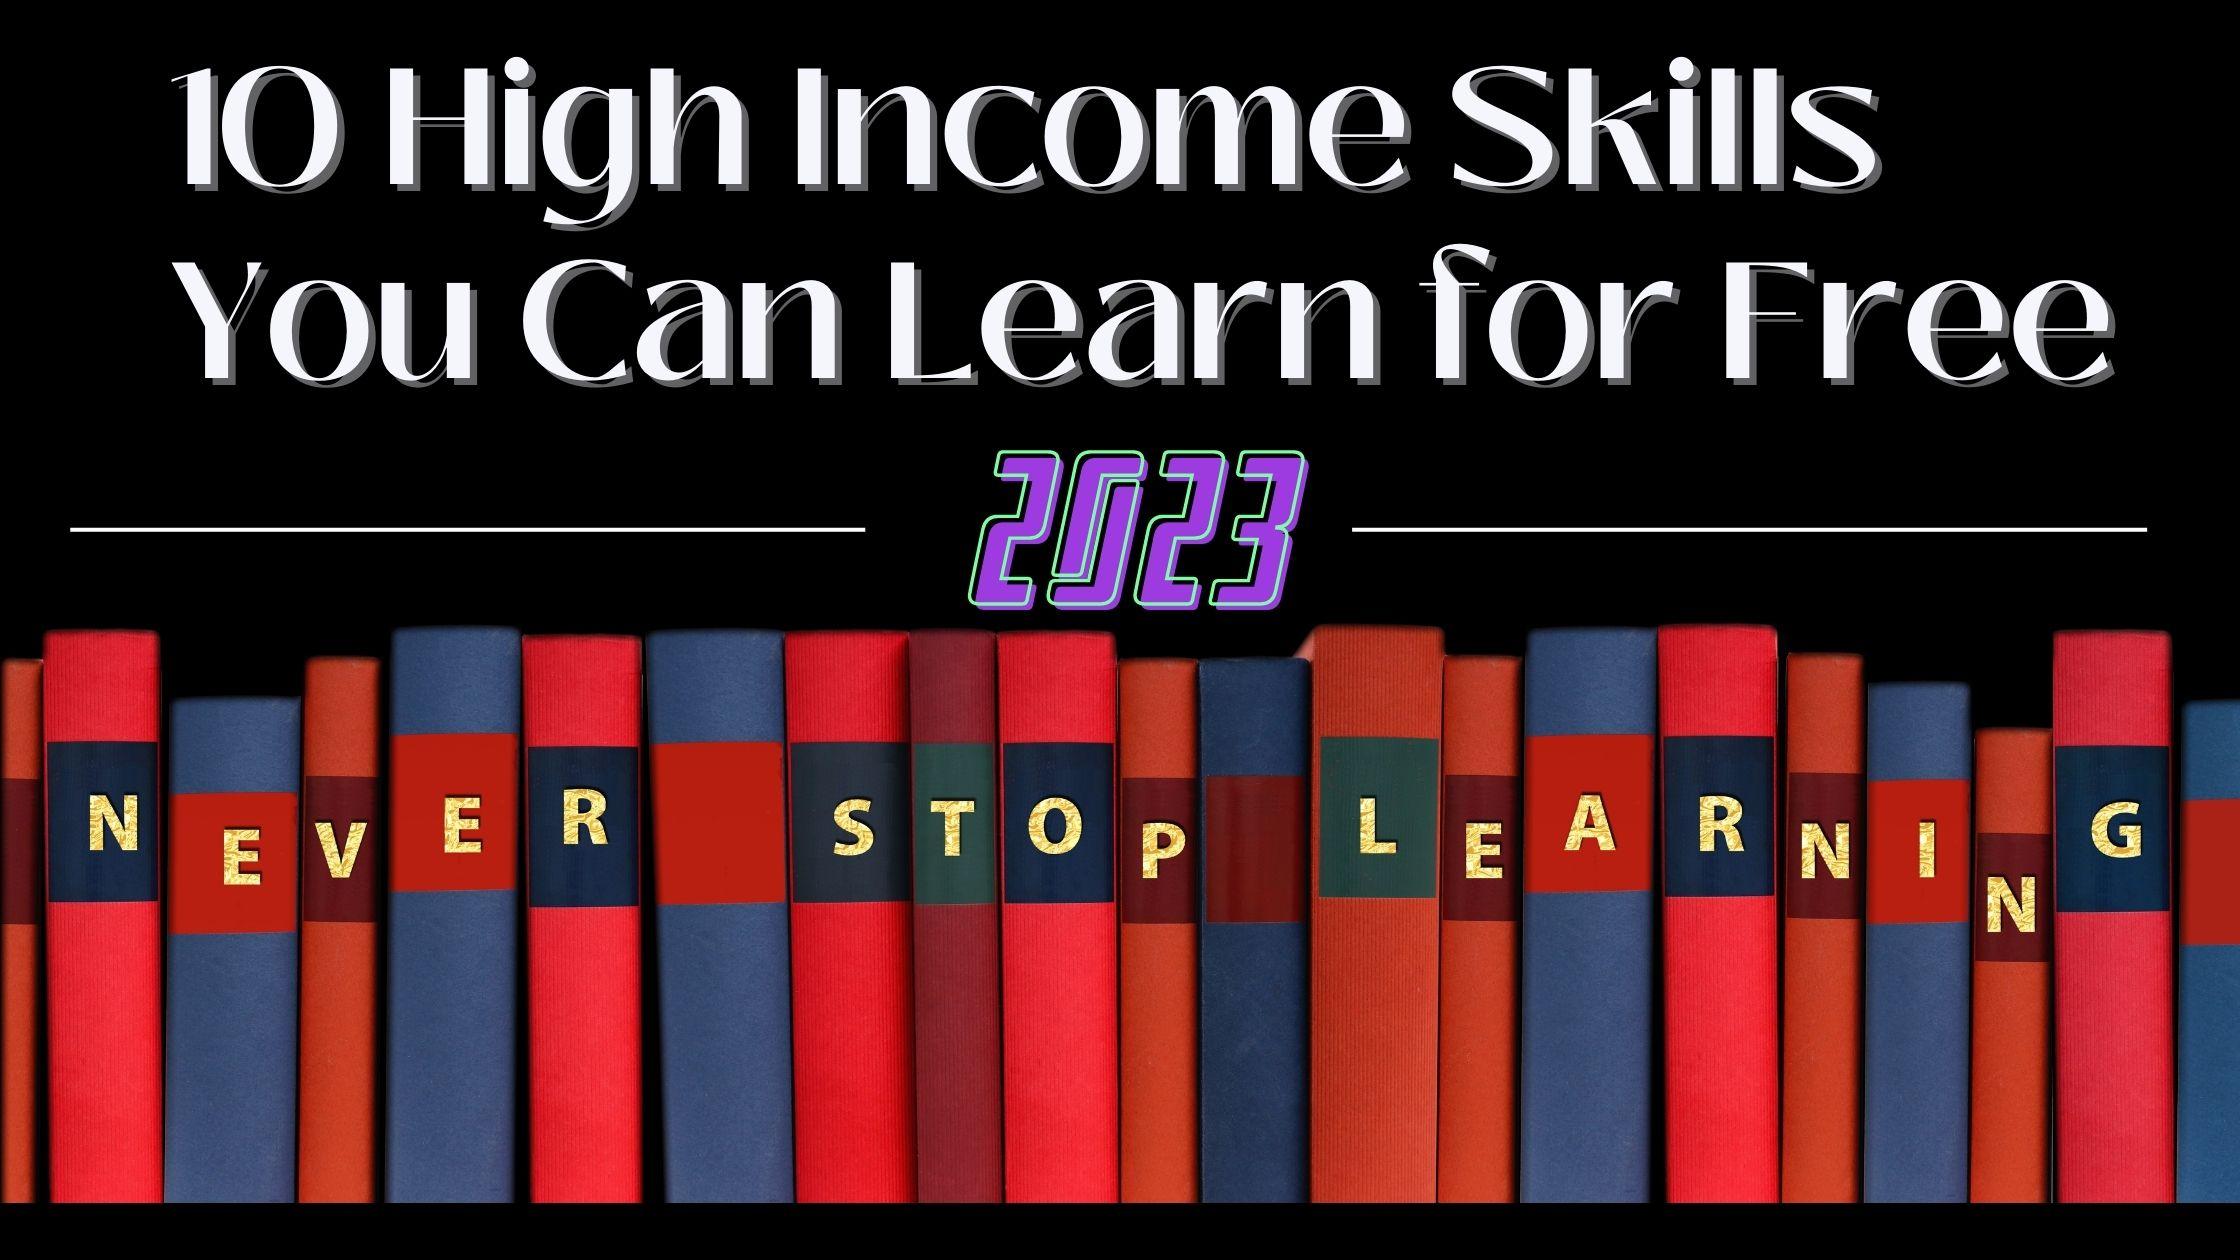 High Income Skills You Can Learn for Free